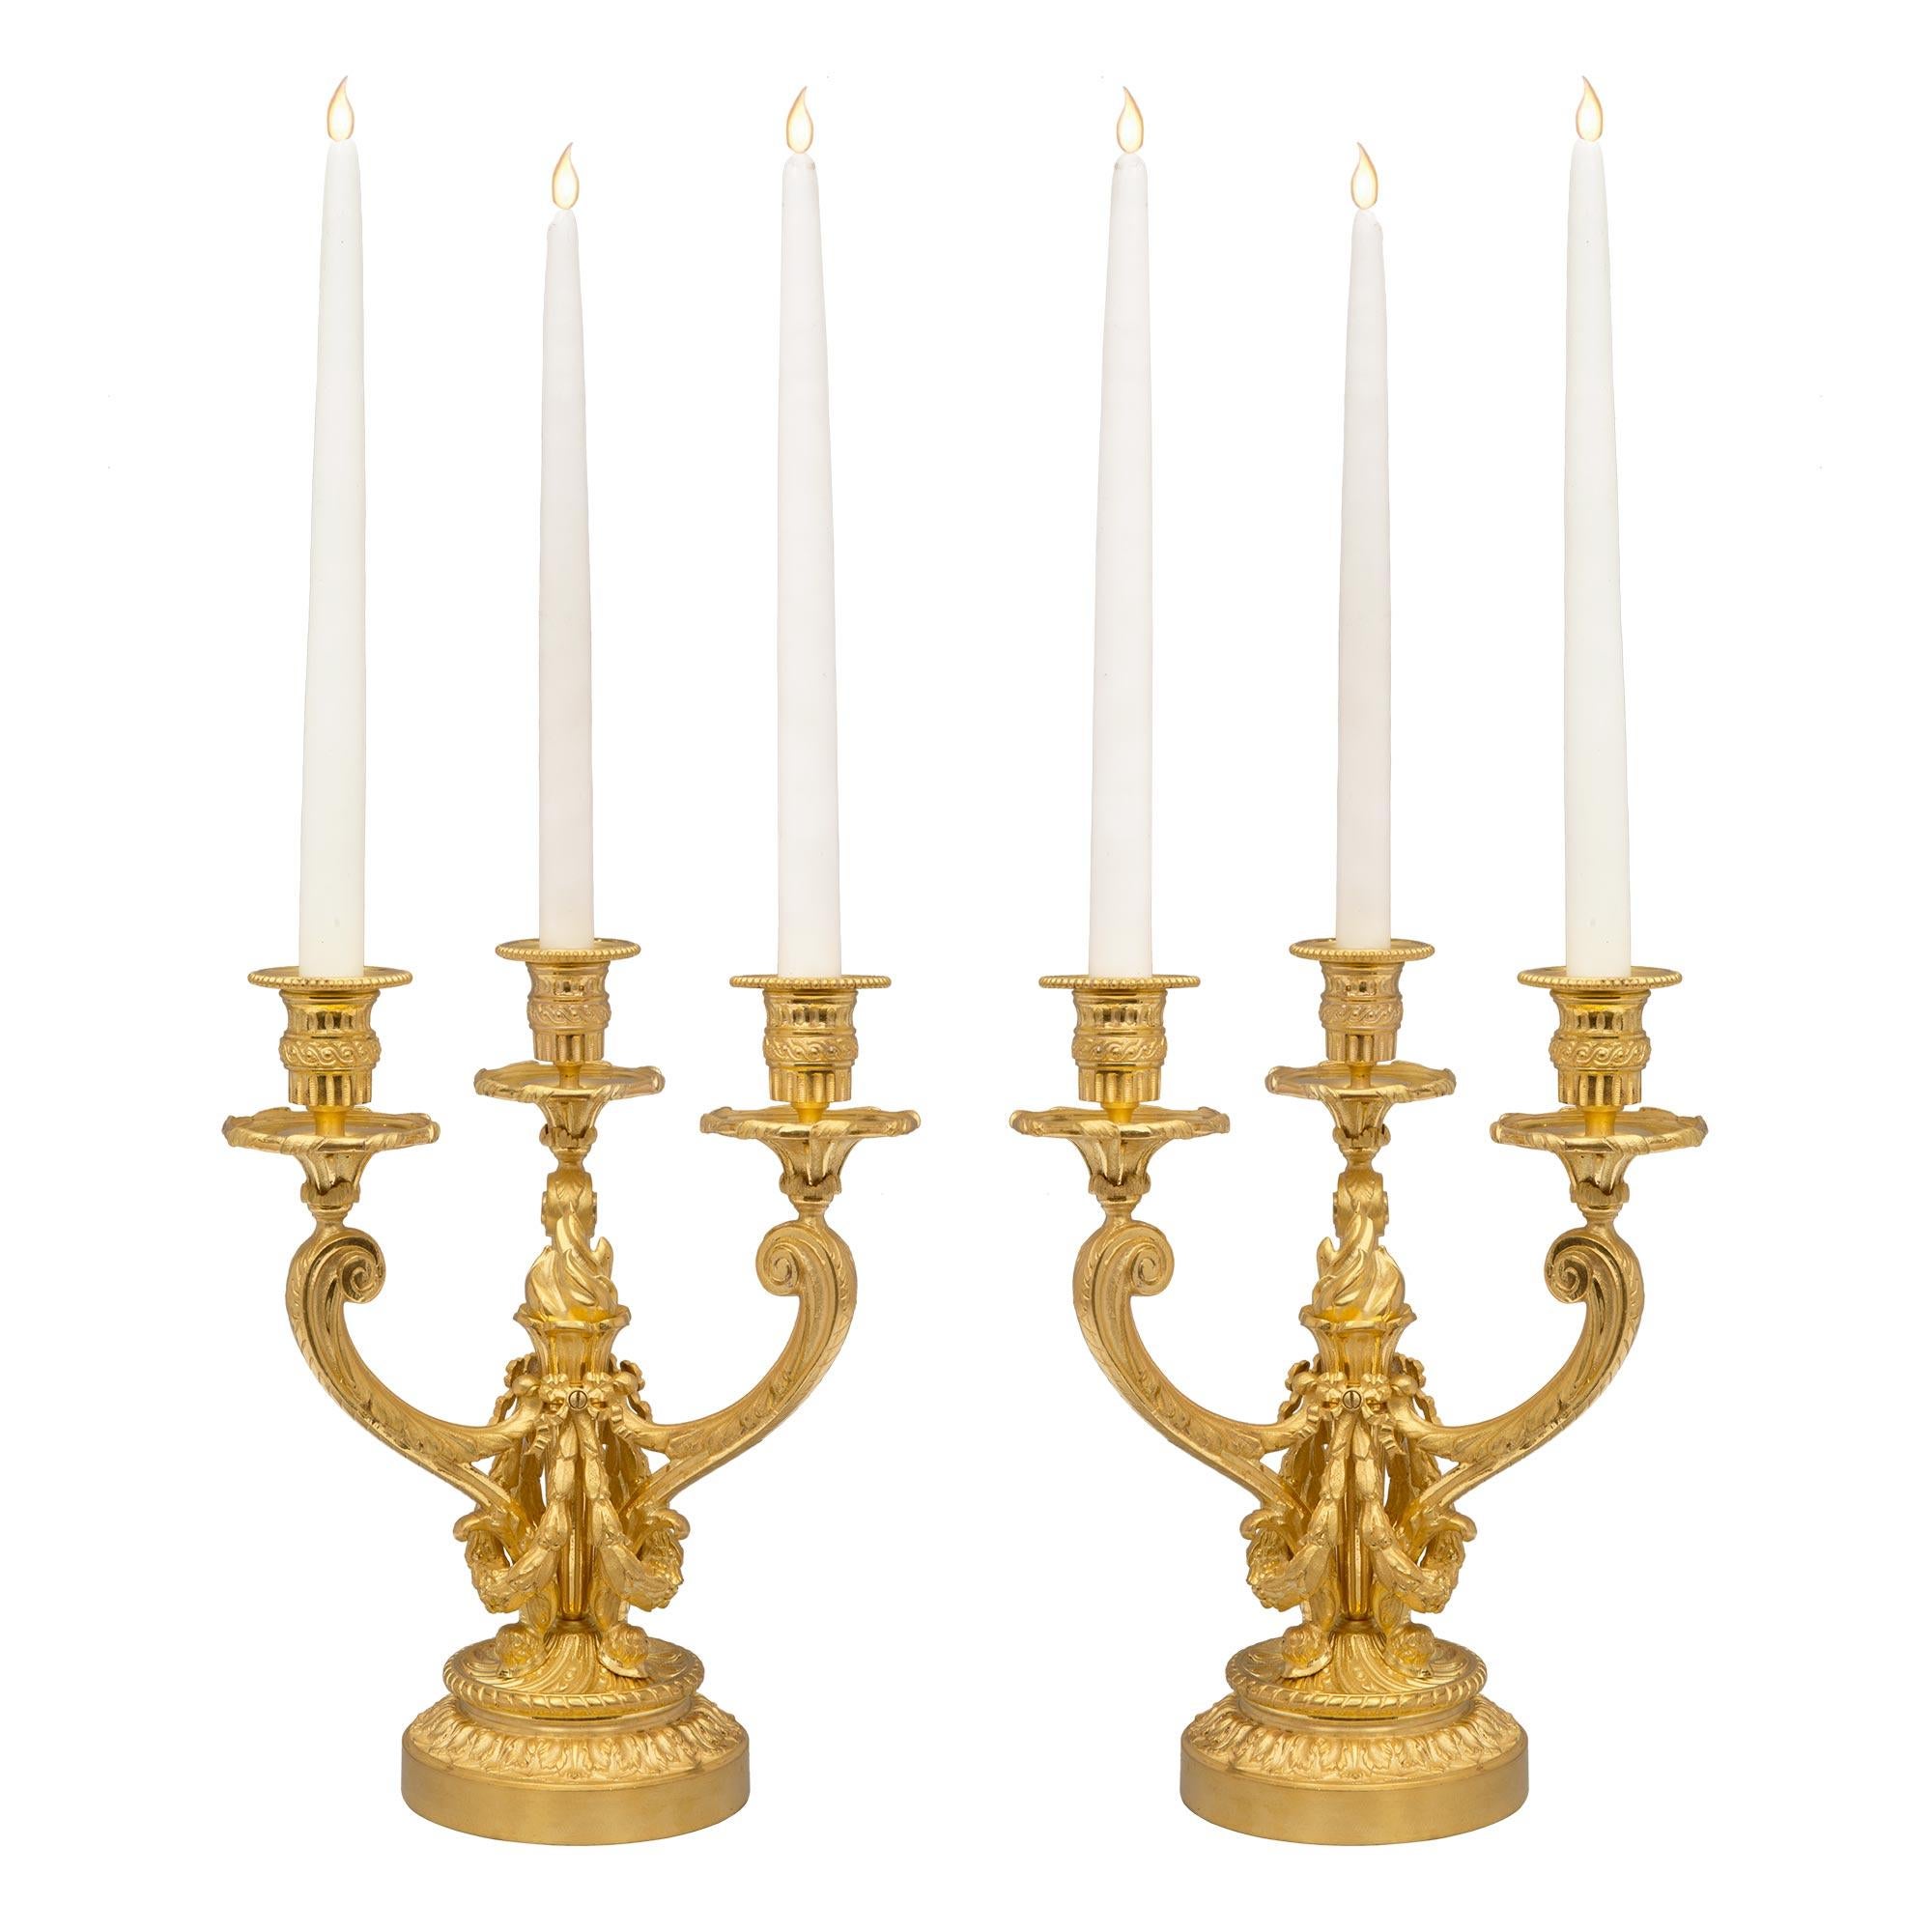 An elegant and high quality pair of French 19th century Louis XVI st. ormolu three arm candelabras. Each candelabra is raised by a circular base with beautiful foliate and a twisted wrap around designs. The three arms branch out form the impressive